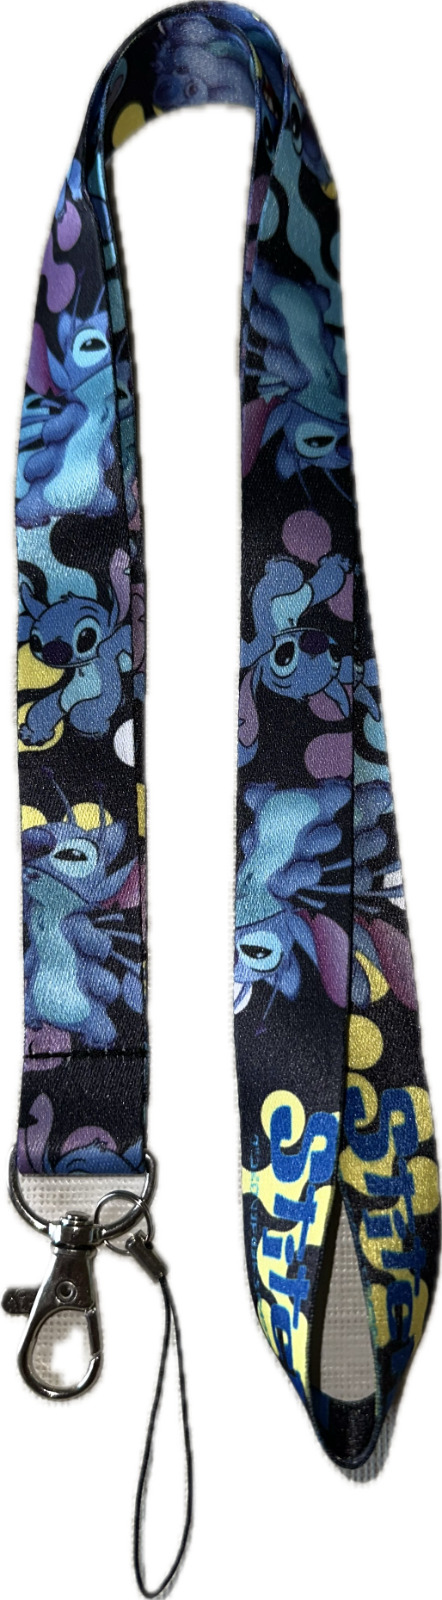 Disney Pin Lanyard - Buy 1 and Select Another 1 Free 